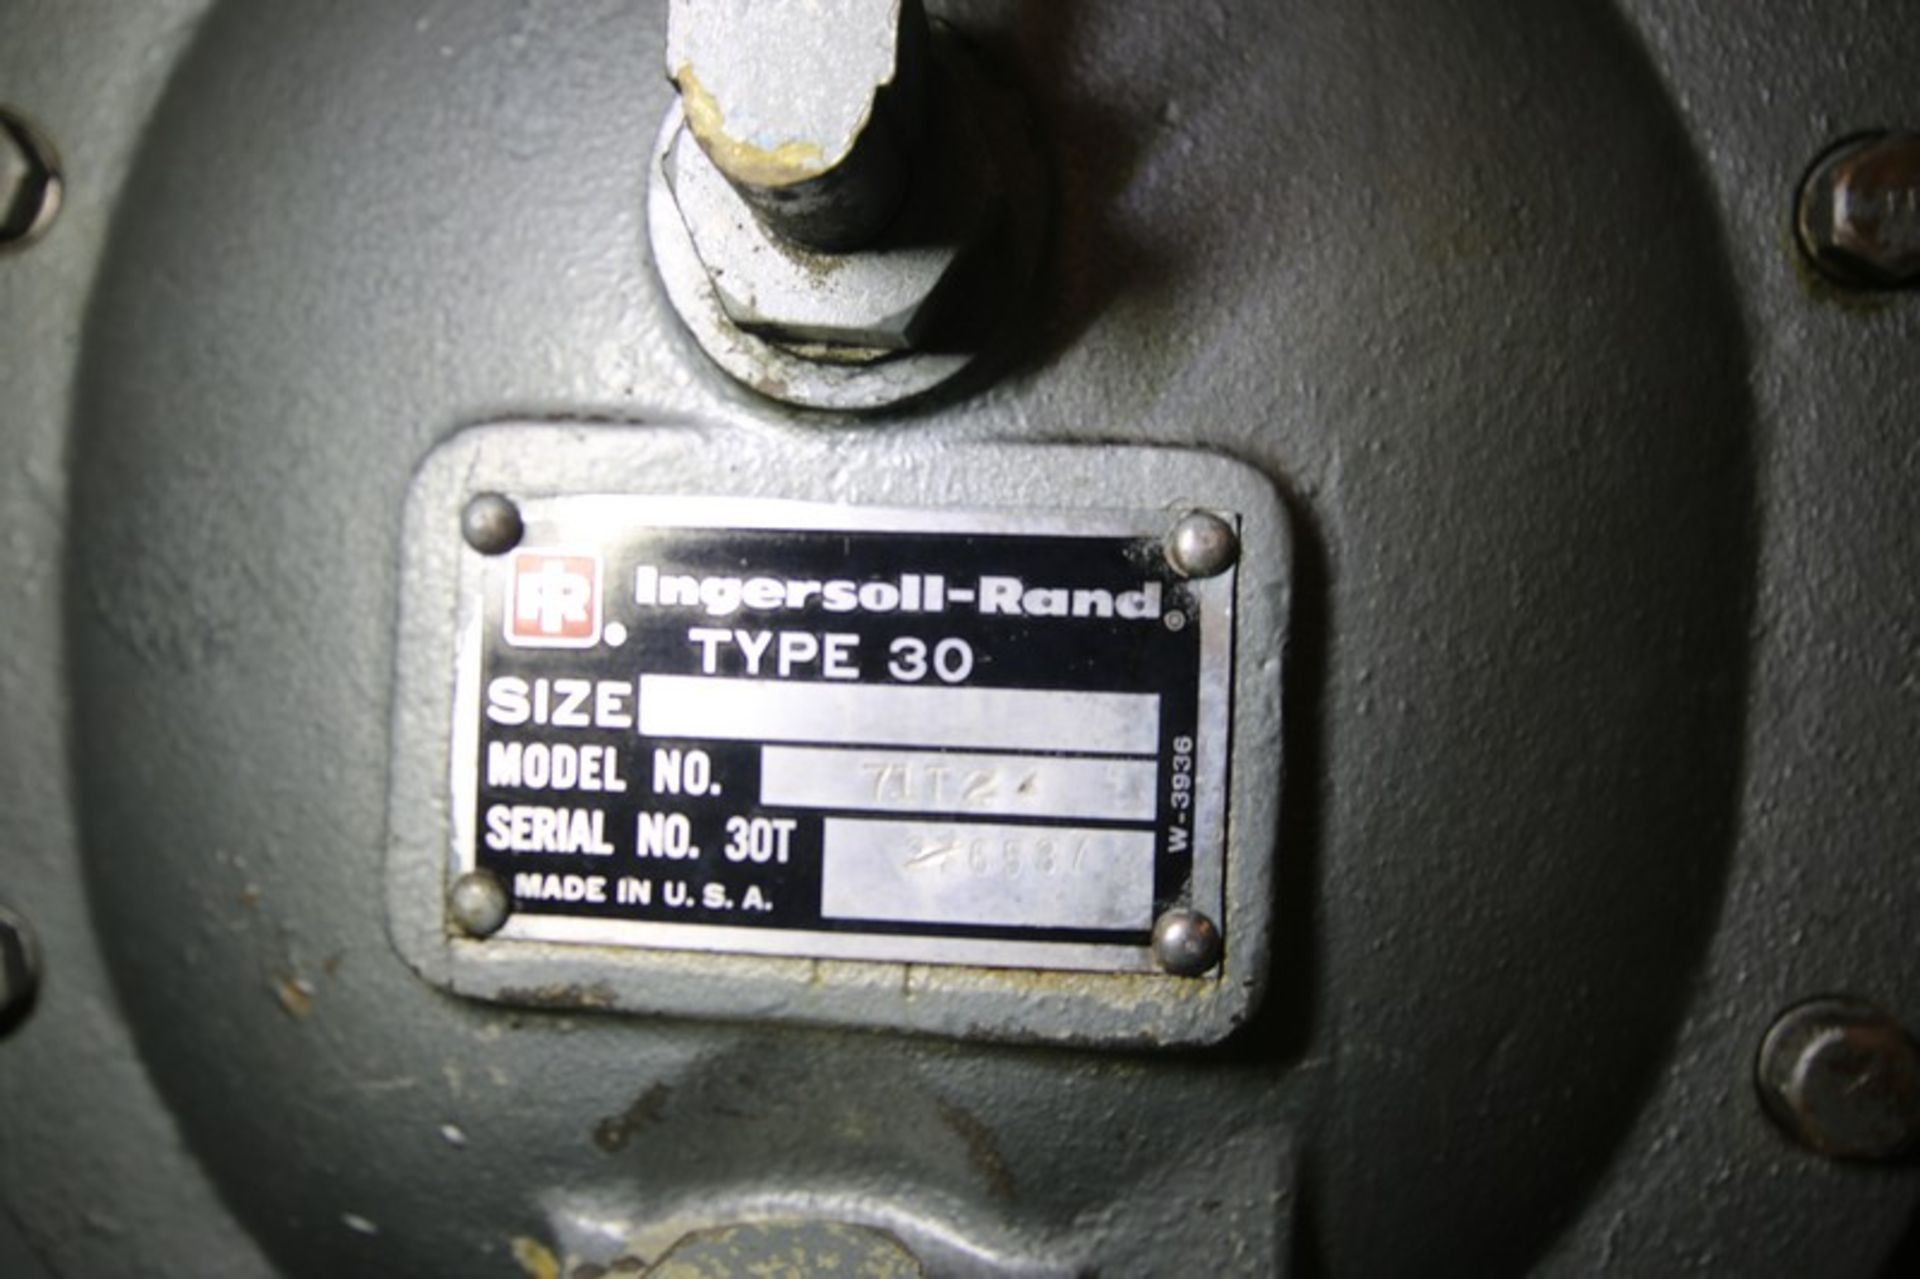 Ingersoll Rand 10 hp Reciprocating Air Compressor,Model 71T4, SN 276537, 1740 rpm, 230/460V, Mounted - Image 2 of 7